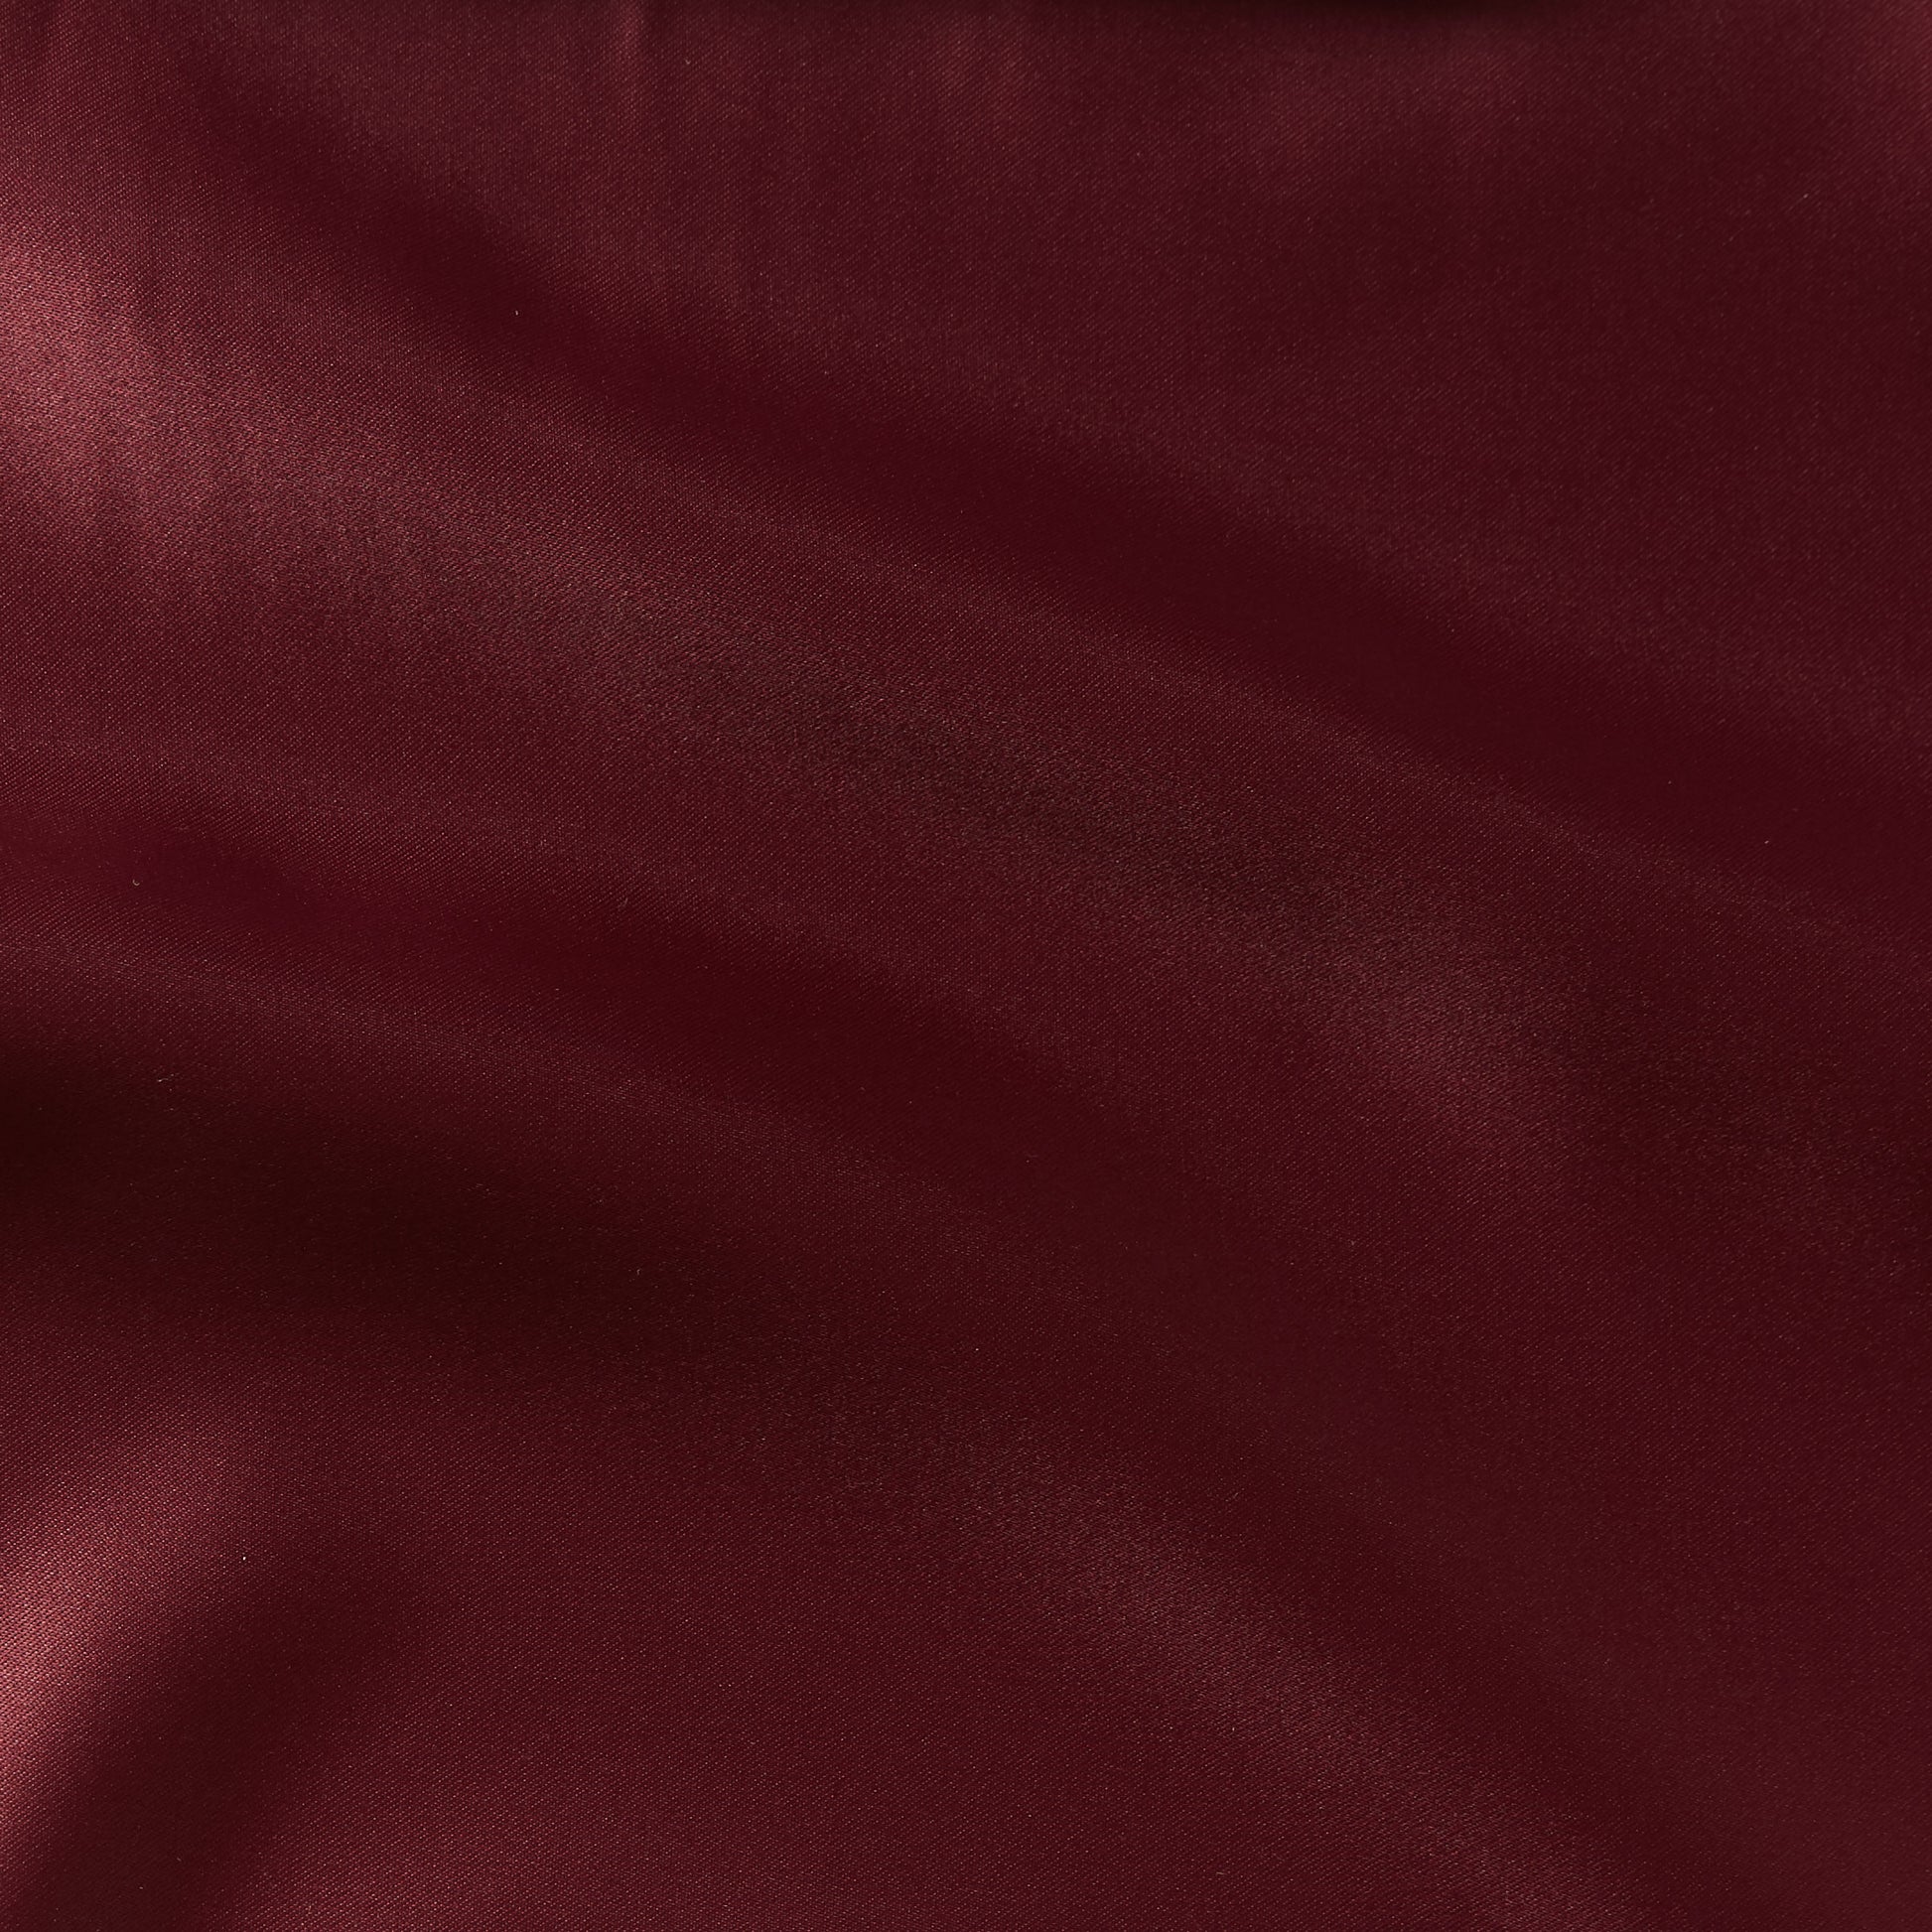 countess showing the burgundy color version of a crisp satin pure polyester fabric with moderate drape